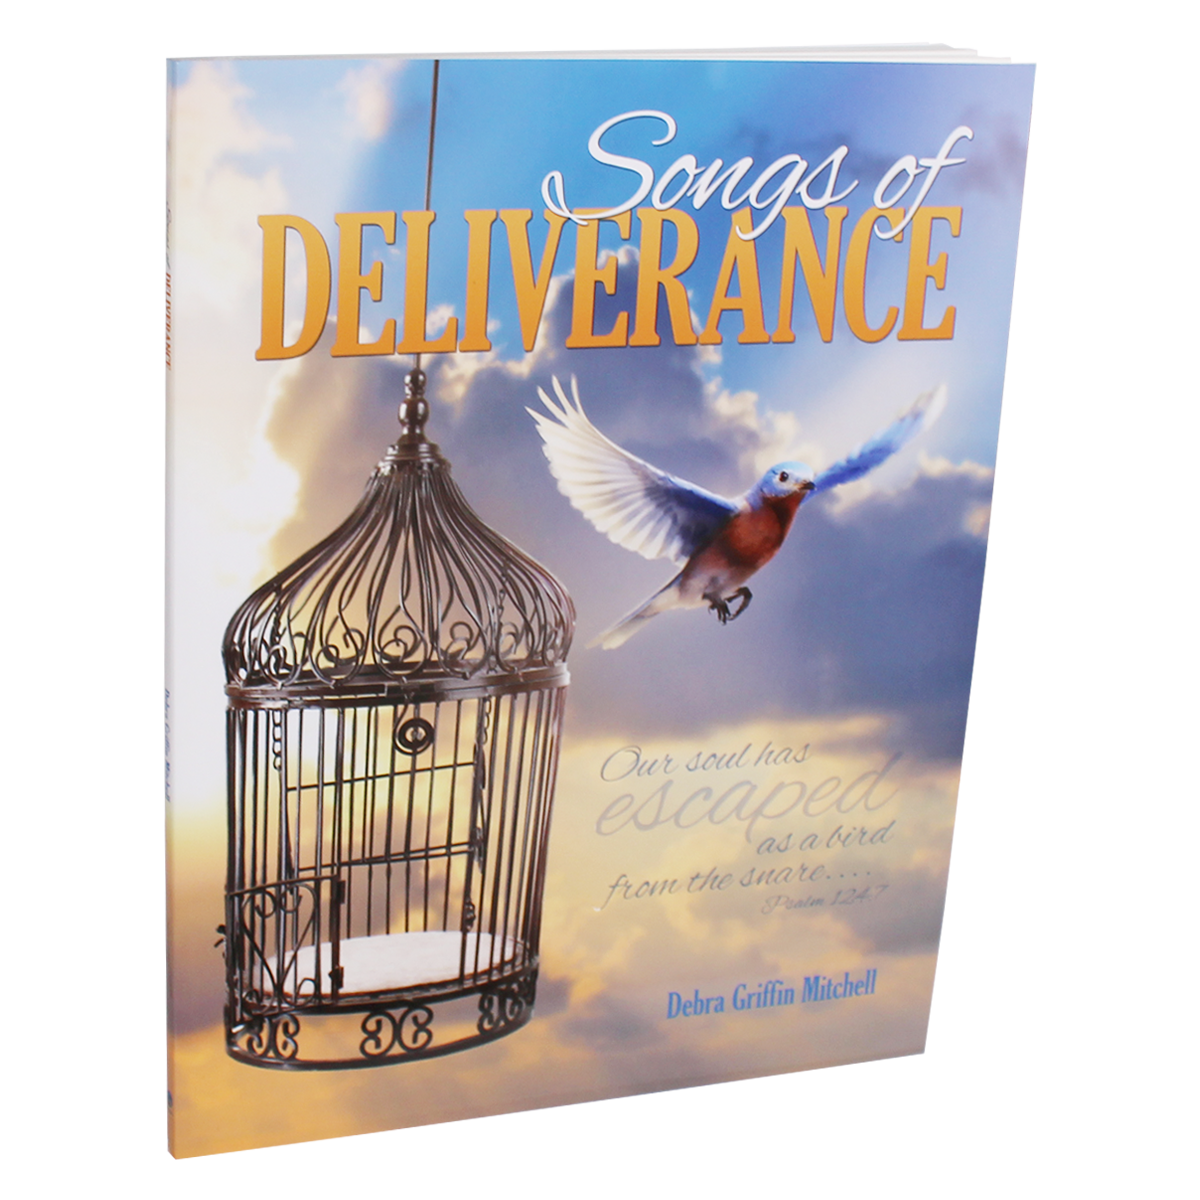 The Songcatcher And Deliverance Analysis